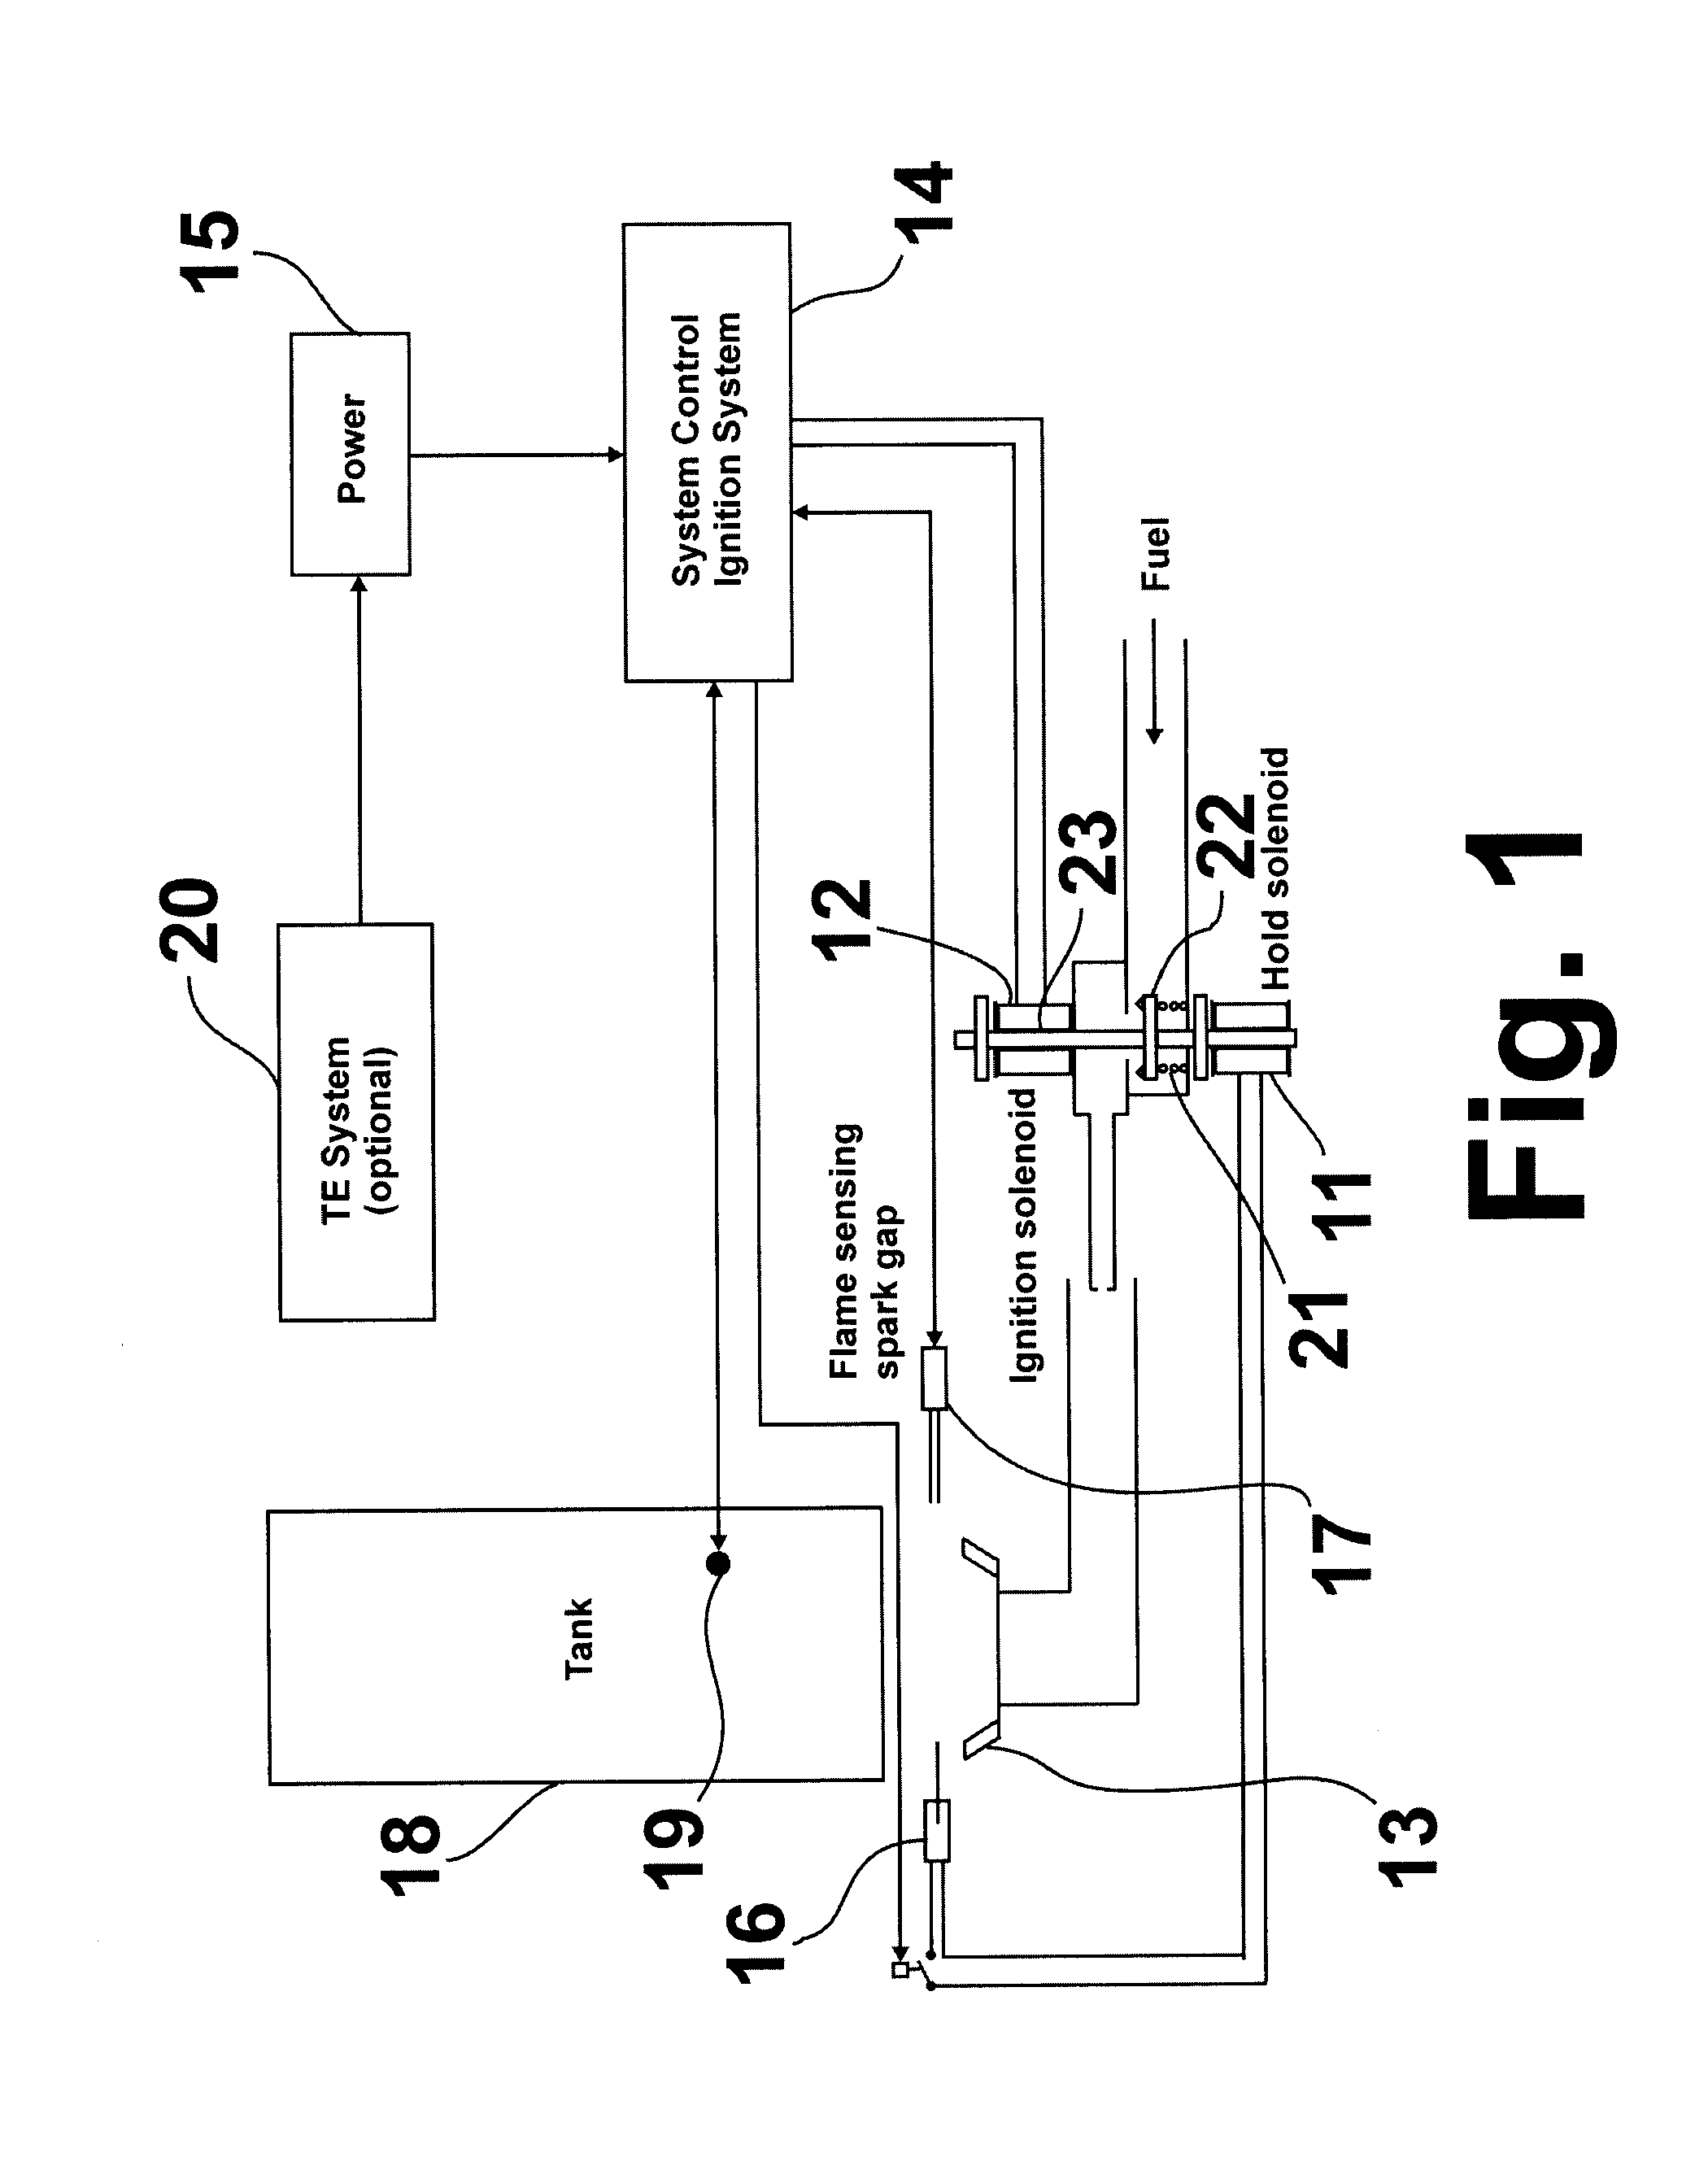 Pilotless, unplugged combustion control system